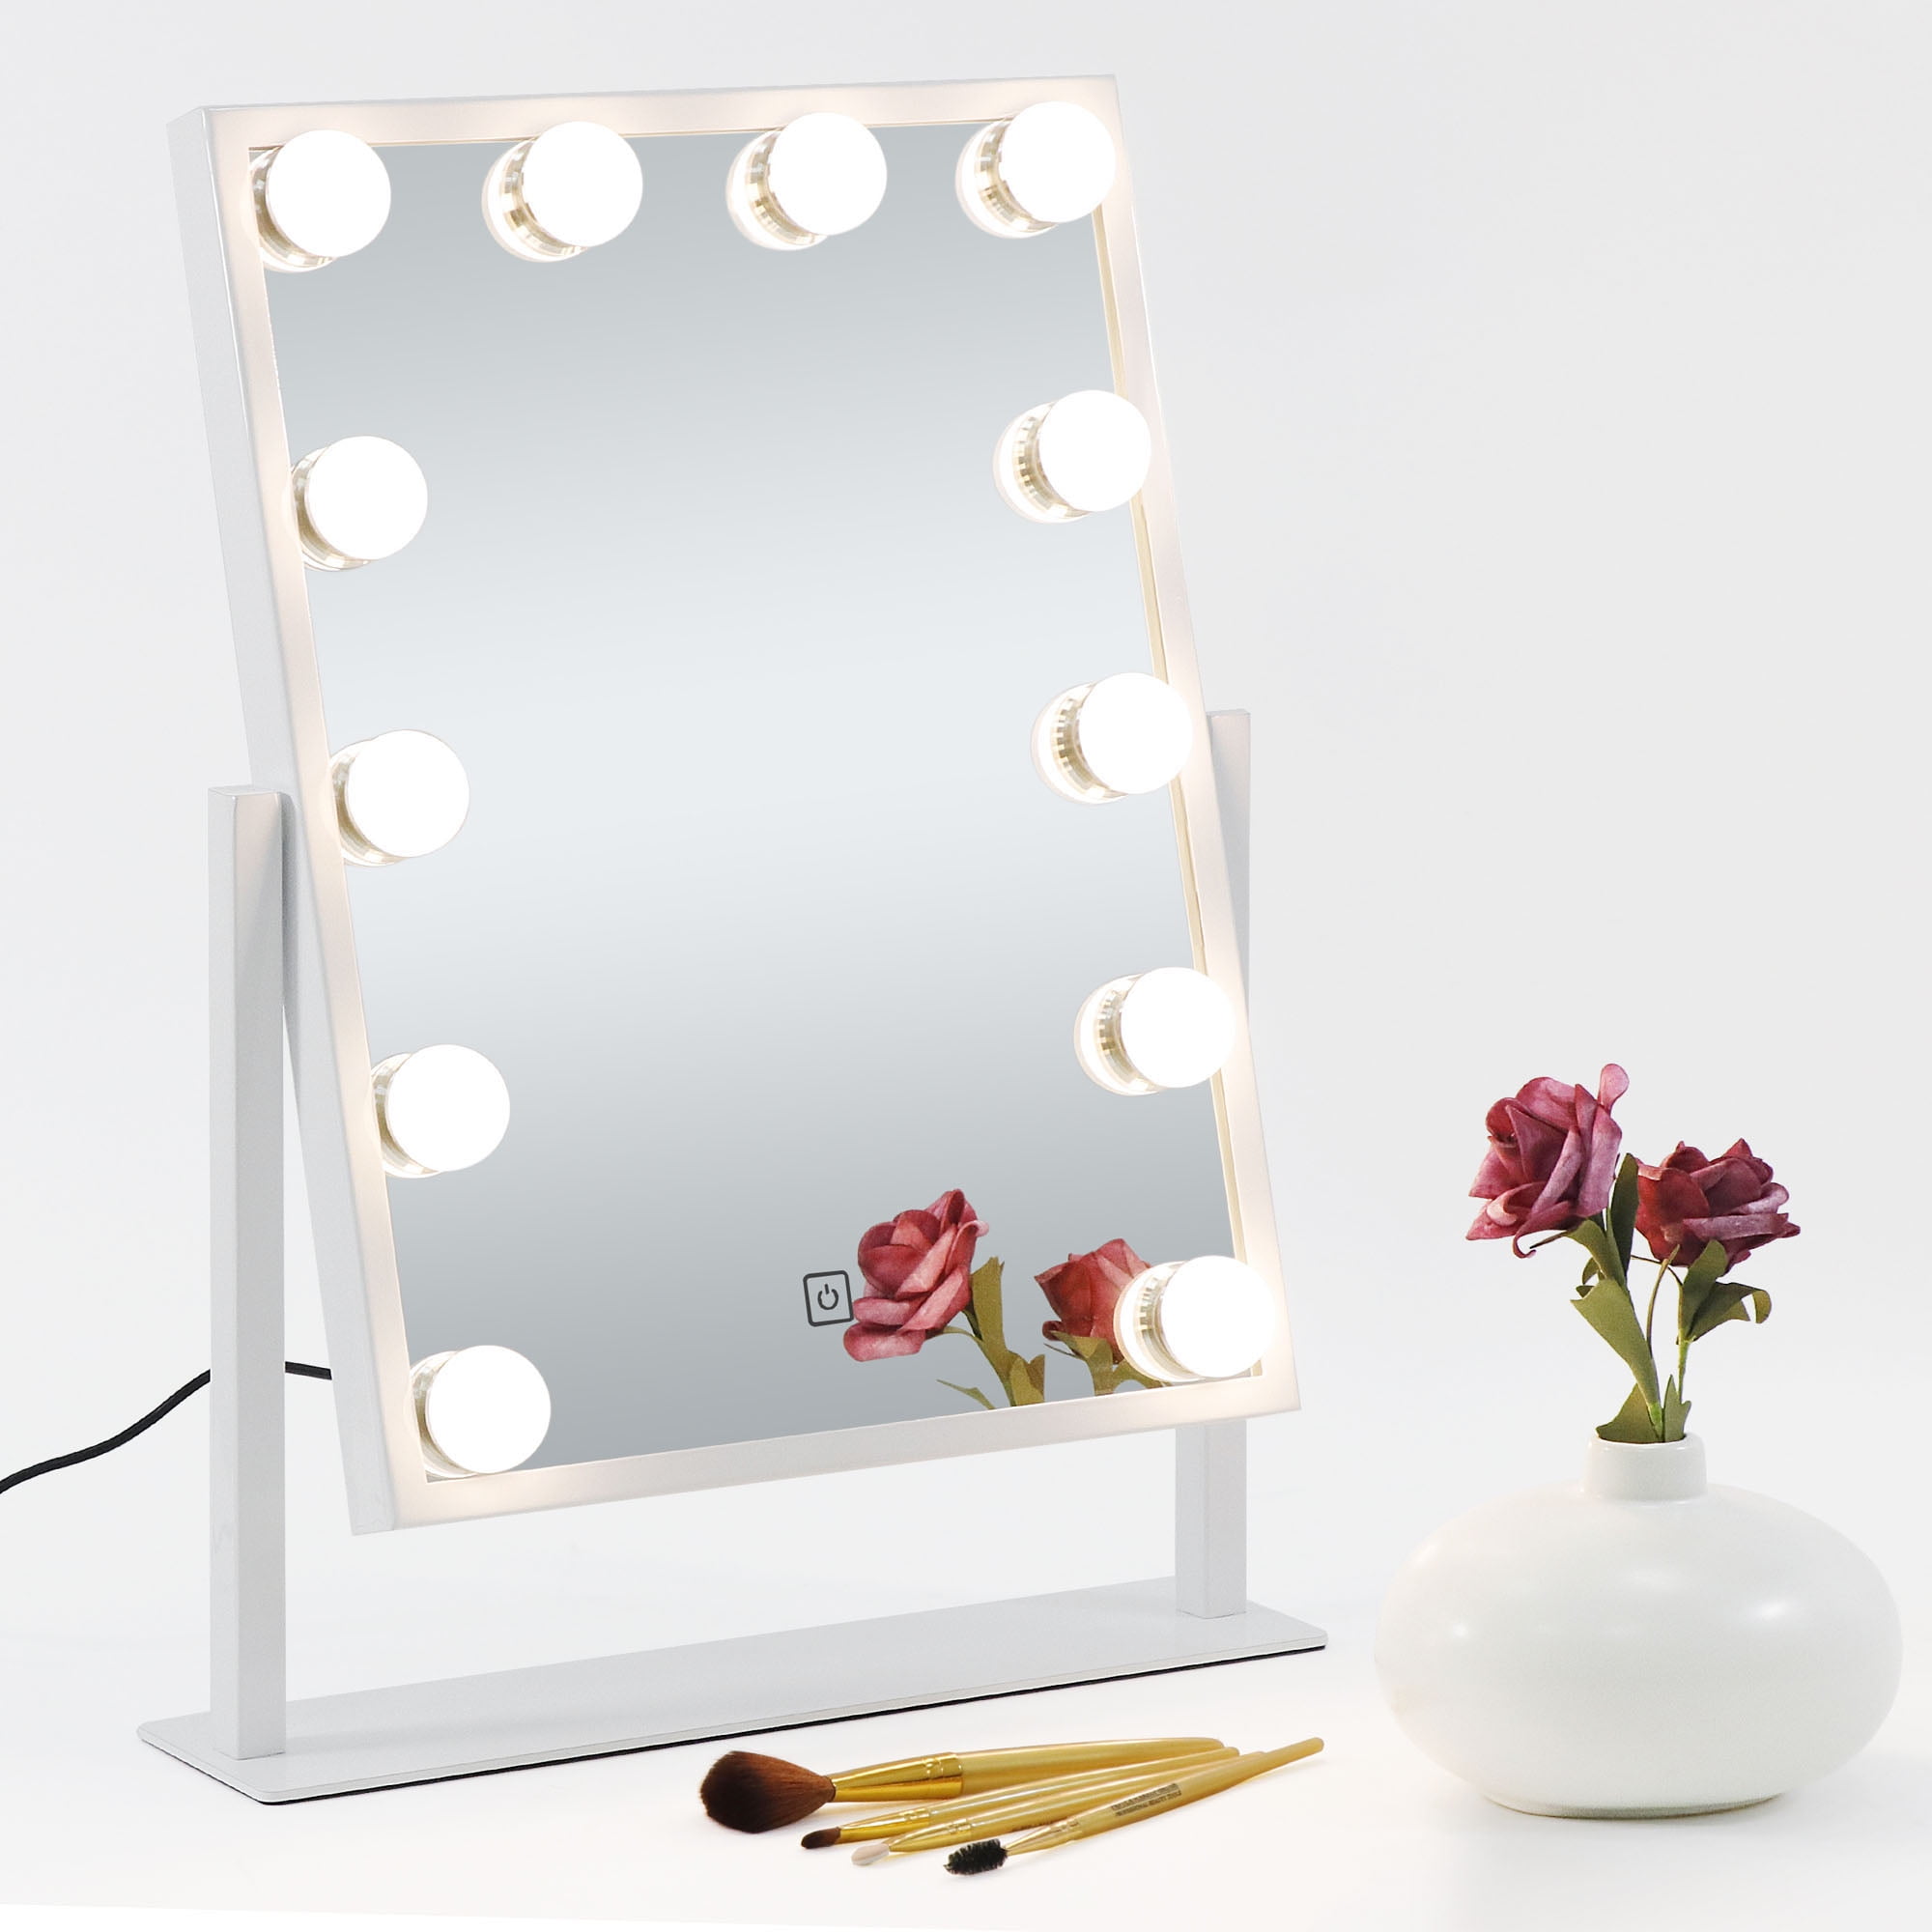 Best Choice Products Hollywood Vanity, Best Choice Products Hollywood Makeup Vanity Mirror